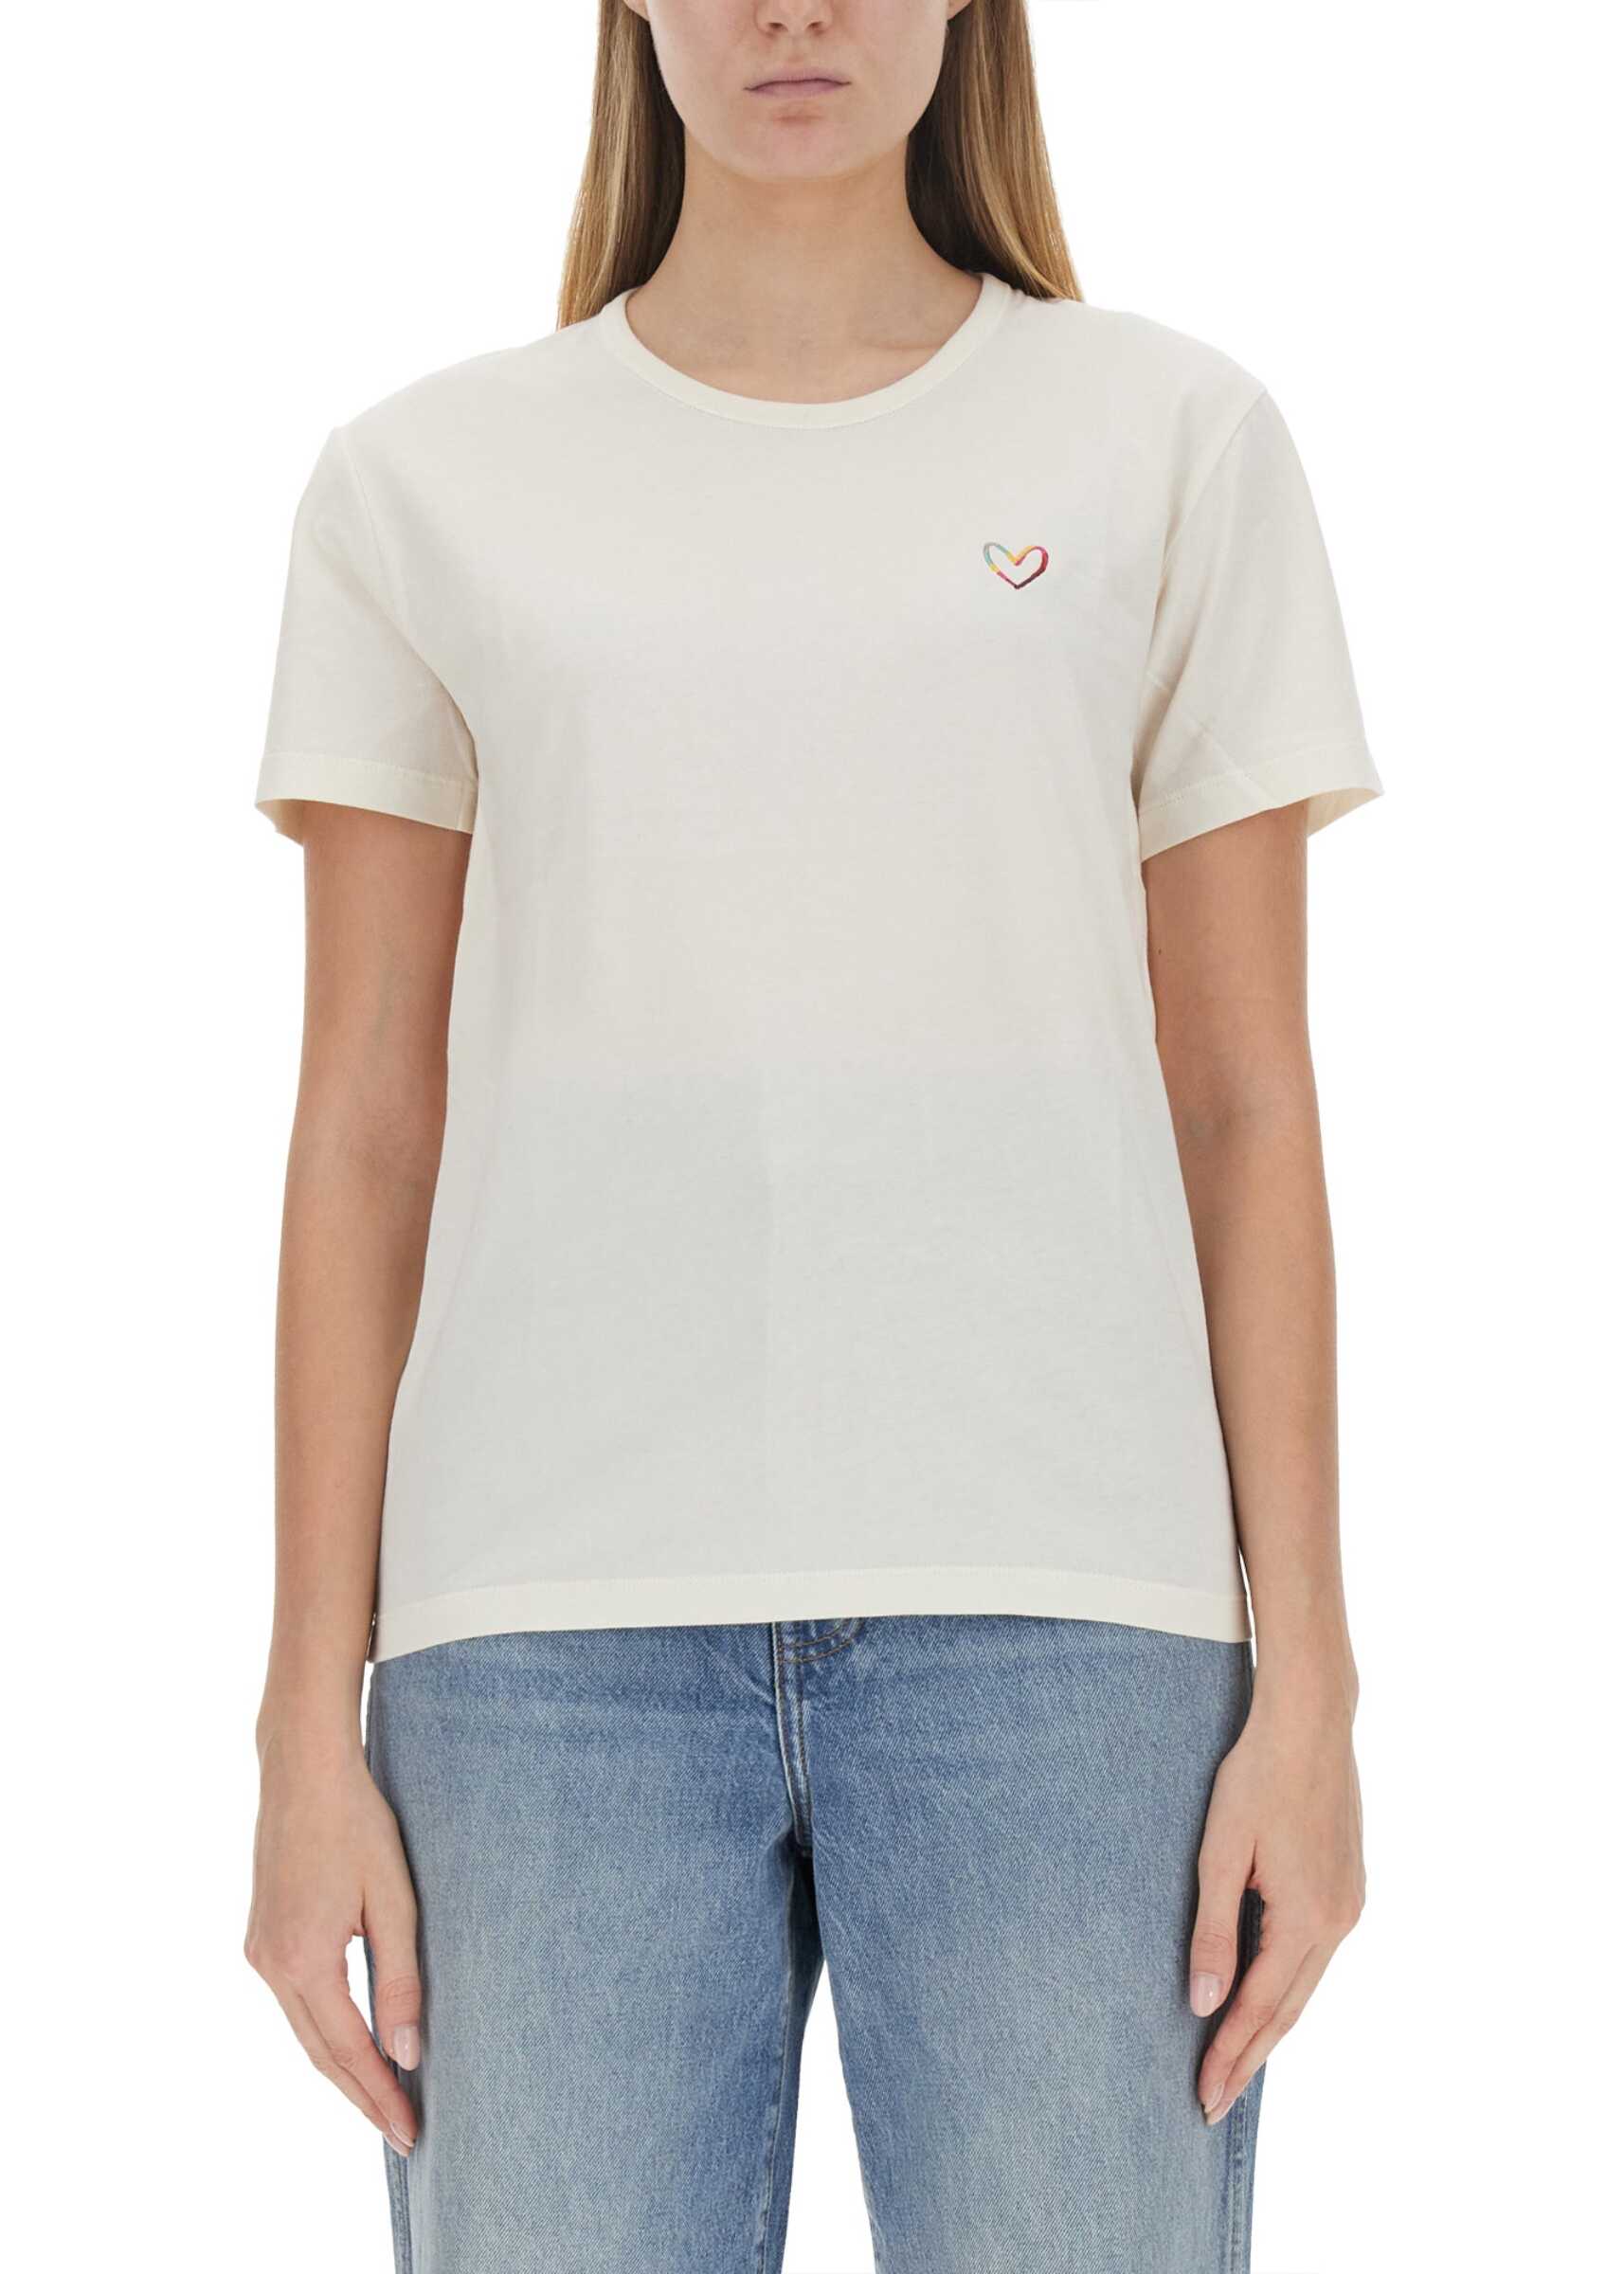 PS by Paul Smith Swirl Heart T-Shirt WHITE